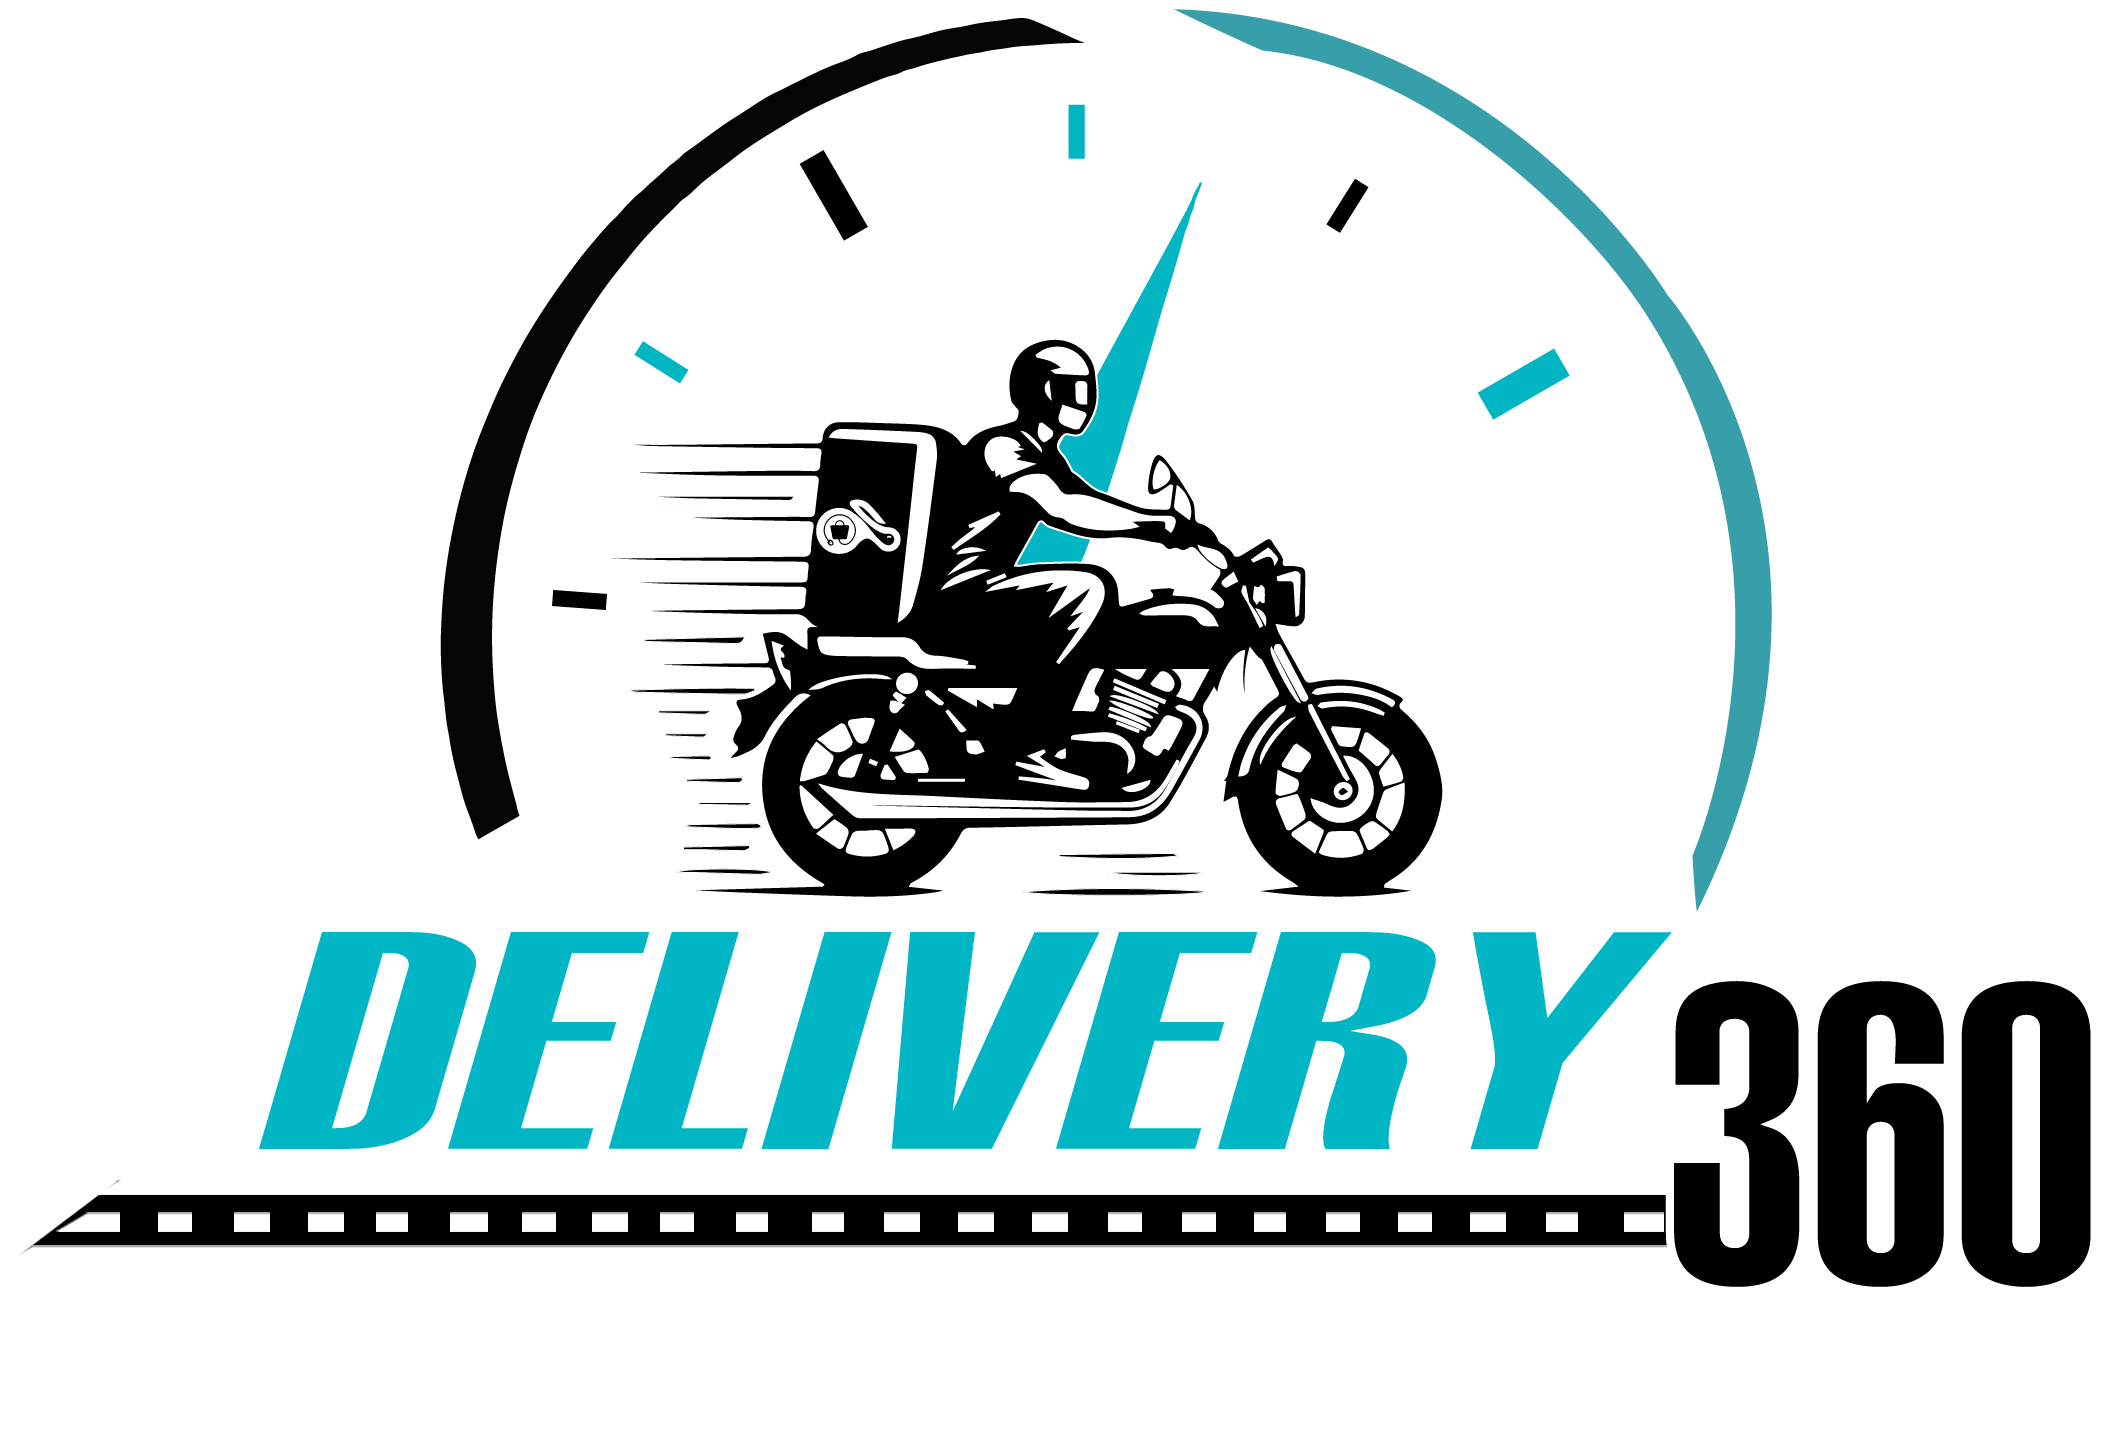 Delivery 360